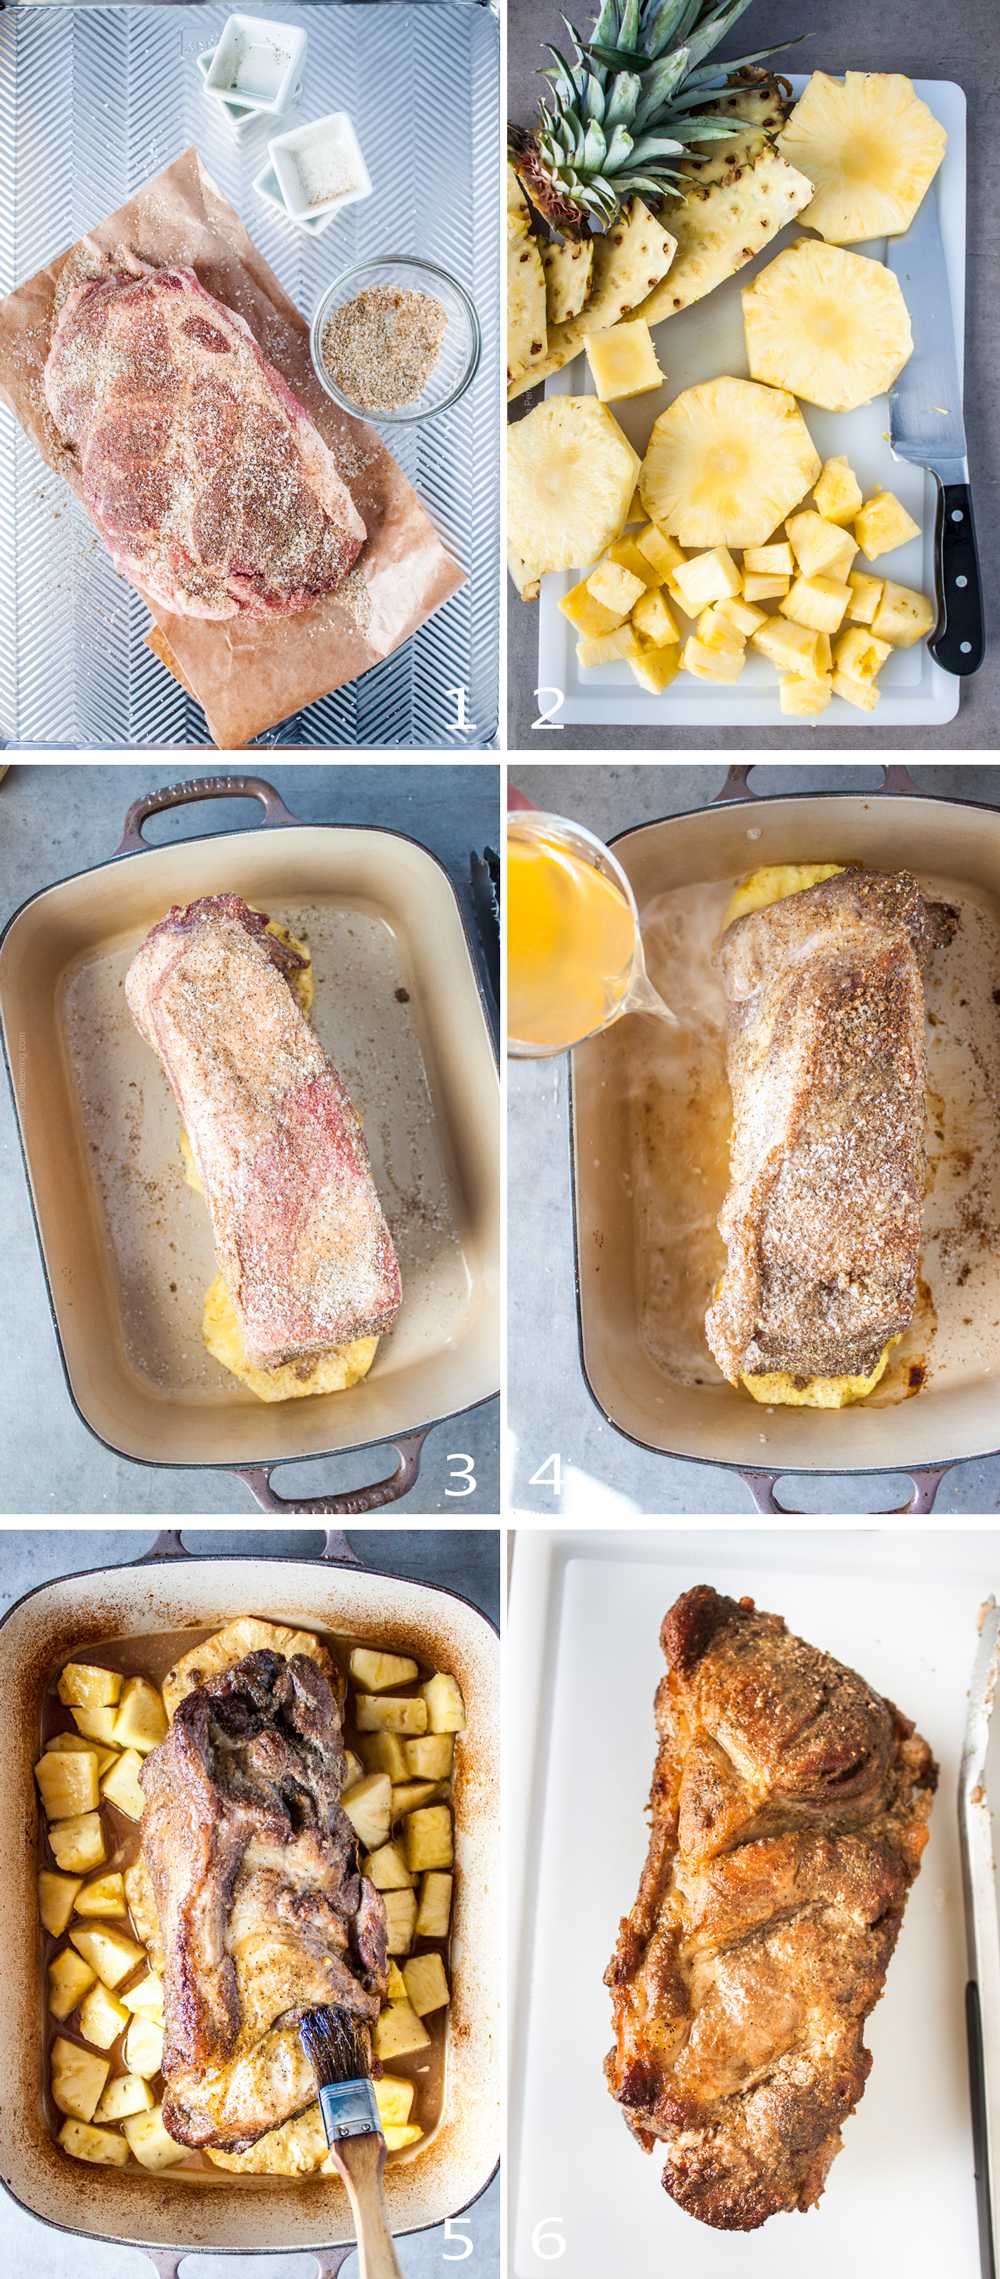 How to make pineapple pork - step by step picture collage.